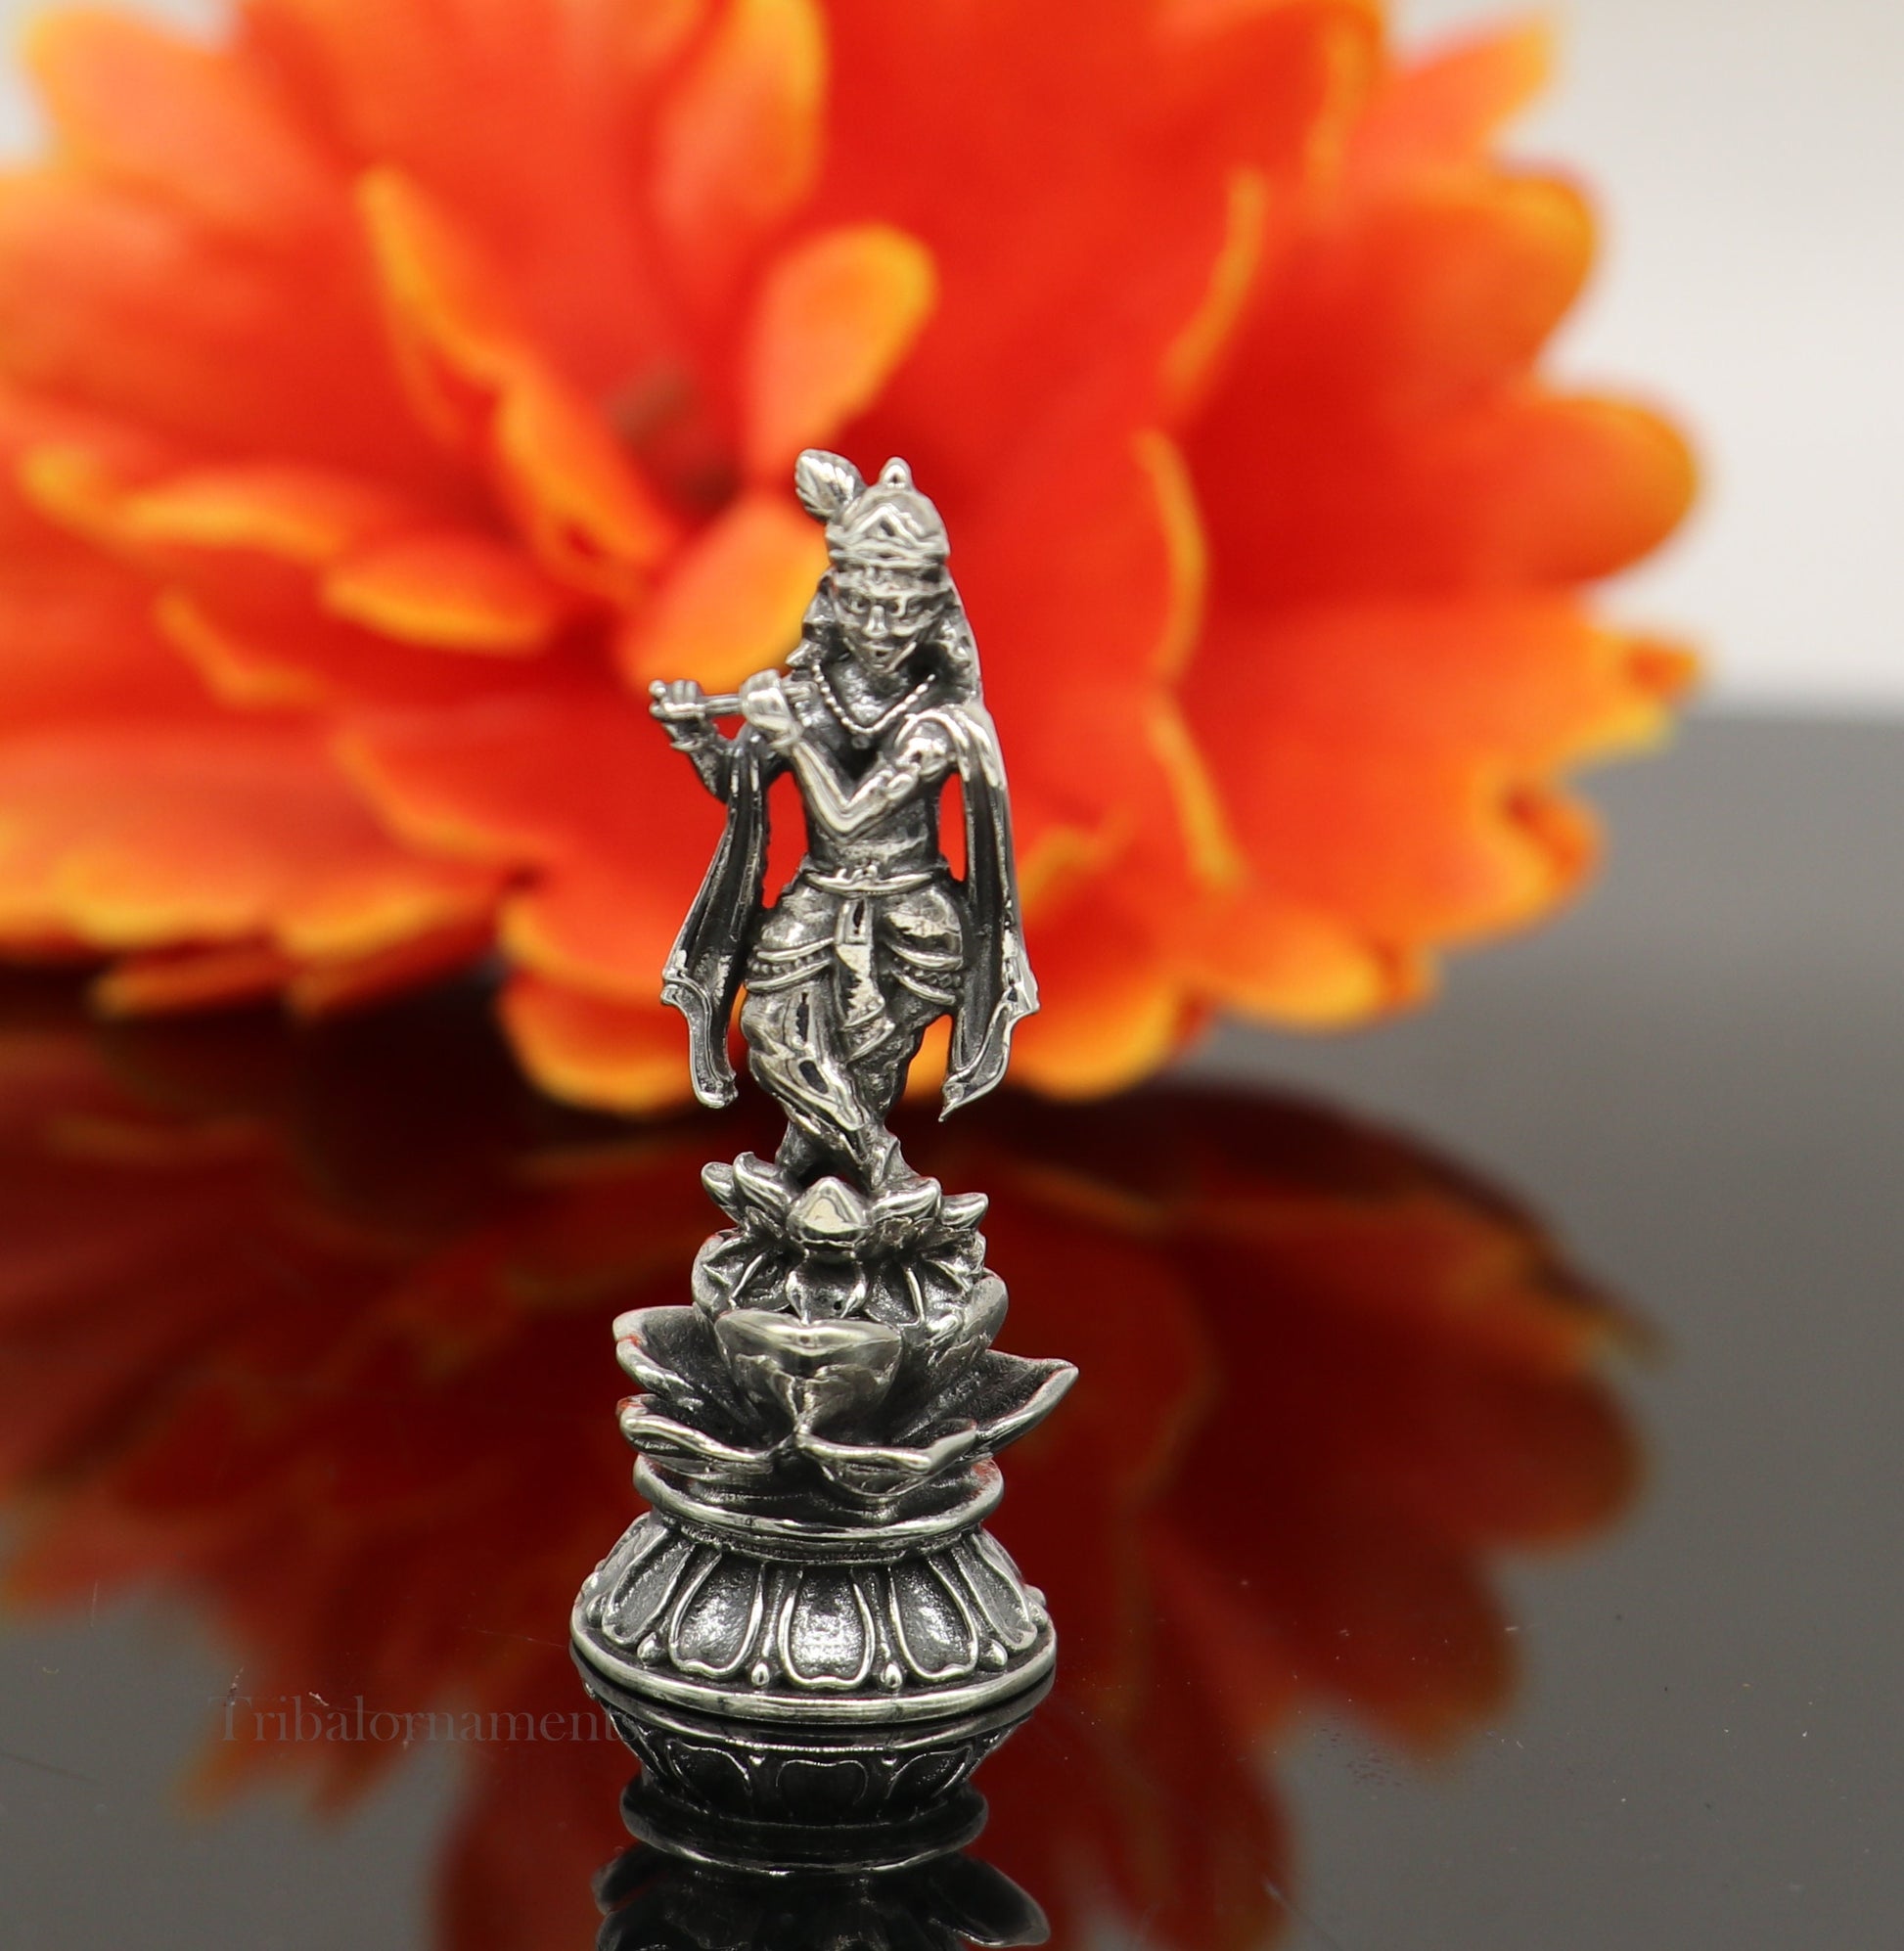 925 Sterling silver handmade antique design Idols Lord Krishna with flute standing Statue figurine, puja articles decorative gift art158 - TRIBAL ORNAMENTS